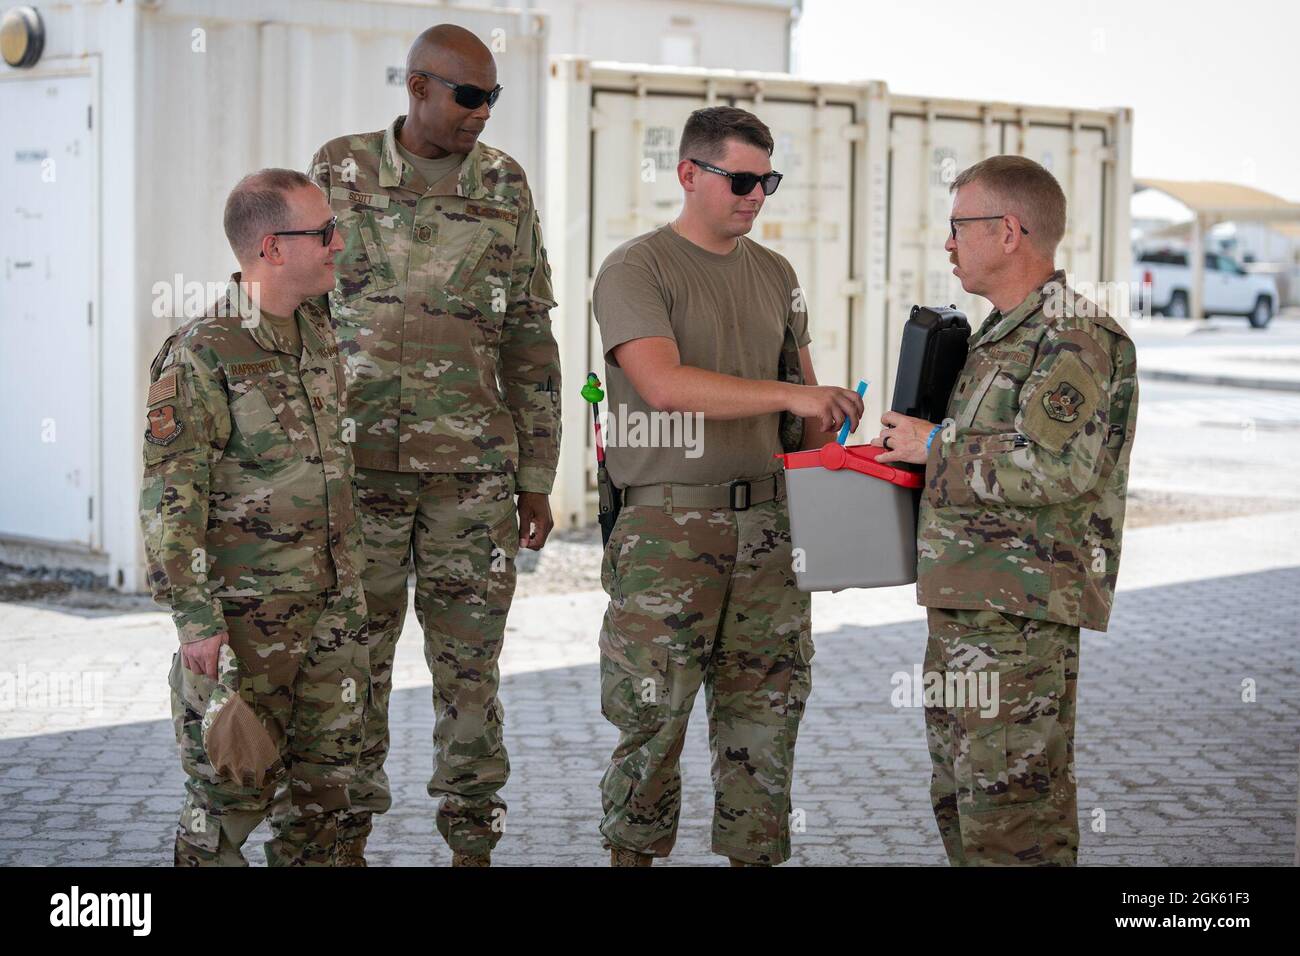 U.S. Air Force Chaplain Capt. Saul Rappeport (left), rabbi, 380th Air Expeditionary Wing, along with Master Sgt. Earl Scott (center-left), religious affairs airman, and Chaplain Maj. Thomas Duston (right), deputy wing chaplain, offer cold treats to members at Al Dhafra Air Base, United Arab Emirates, Aug 11, 2021. ADAB’s unique chapel team is comprised of three different religious leaders and offers Jewish, Catholic and Protestant services and events throughout the week. Stock Photo